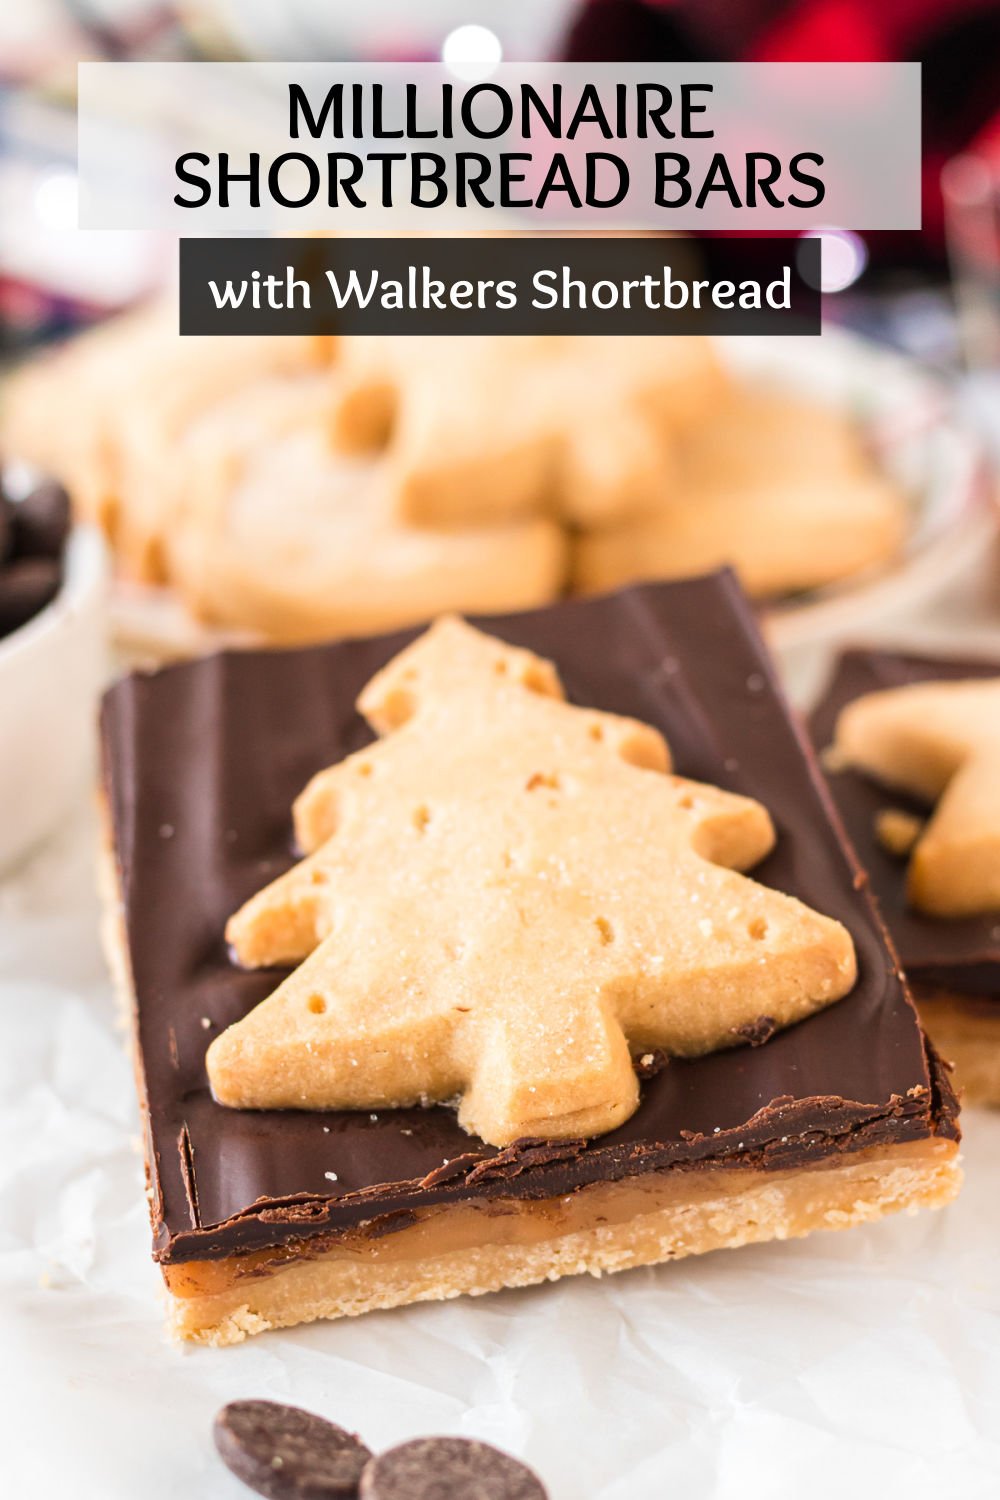 Millionaire Shortbread Bars - a layer of buttery shortbread made easy with Walkers Shortbread, topped with a gooey salted caramel layer, topped with a dark chocolate ganache, and finished with a Walkers Shortbread Festive Shape cookie pressed into the top. | www.persnicketyplates.com